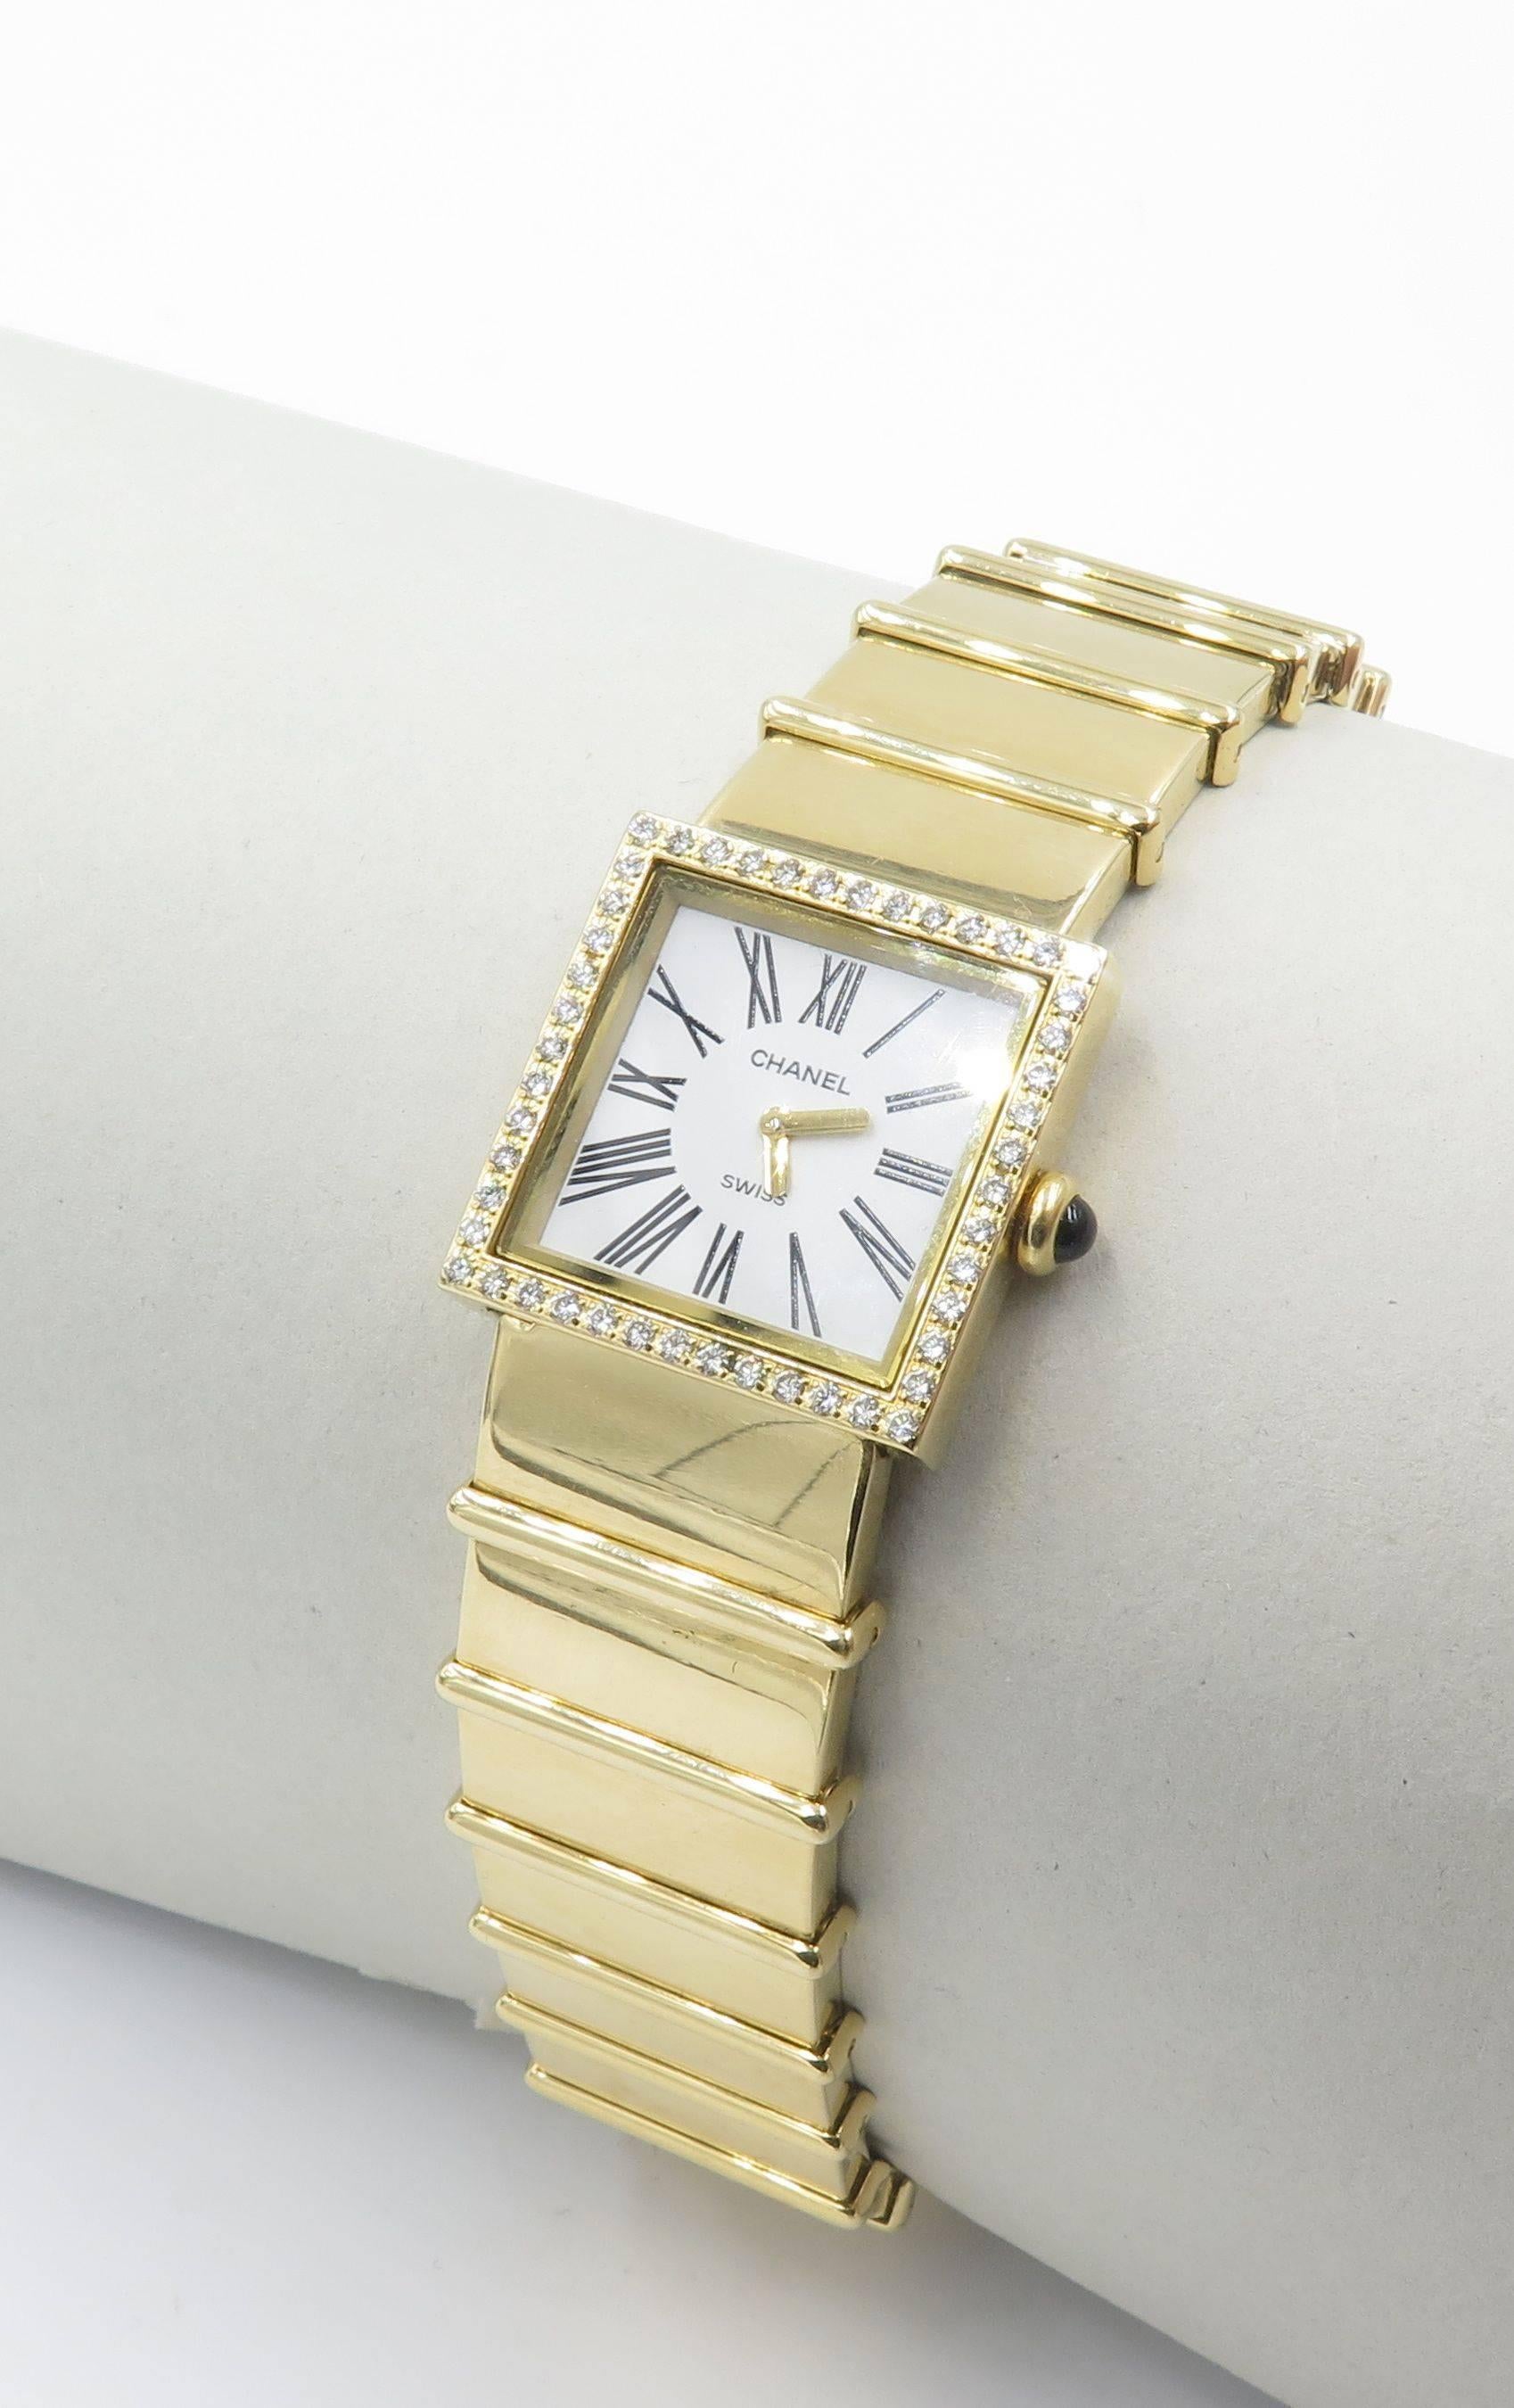 An 18 karat yellow gold and diamond ladies wristwatch.  Chanel.  The ladies yellow gold 23 mm vintage Chanel Mademoiselle Diamond Swiss made quartz watch is set with a diamond bezel, white flat dial, black Roman numeral hour markers, gold-tone stick